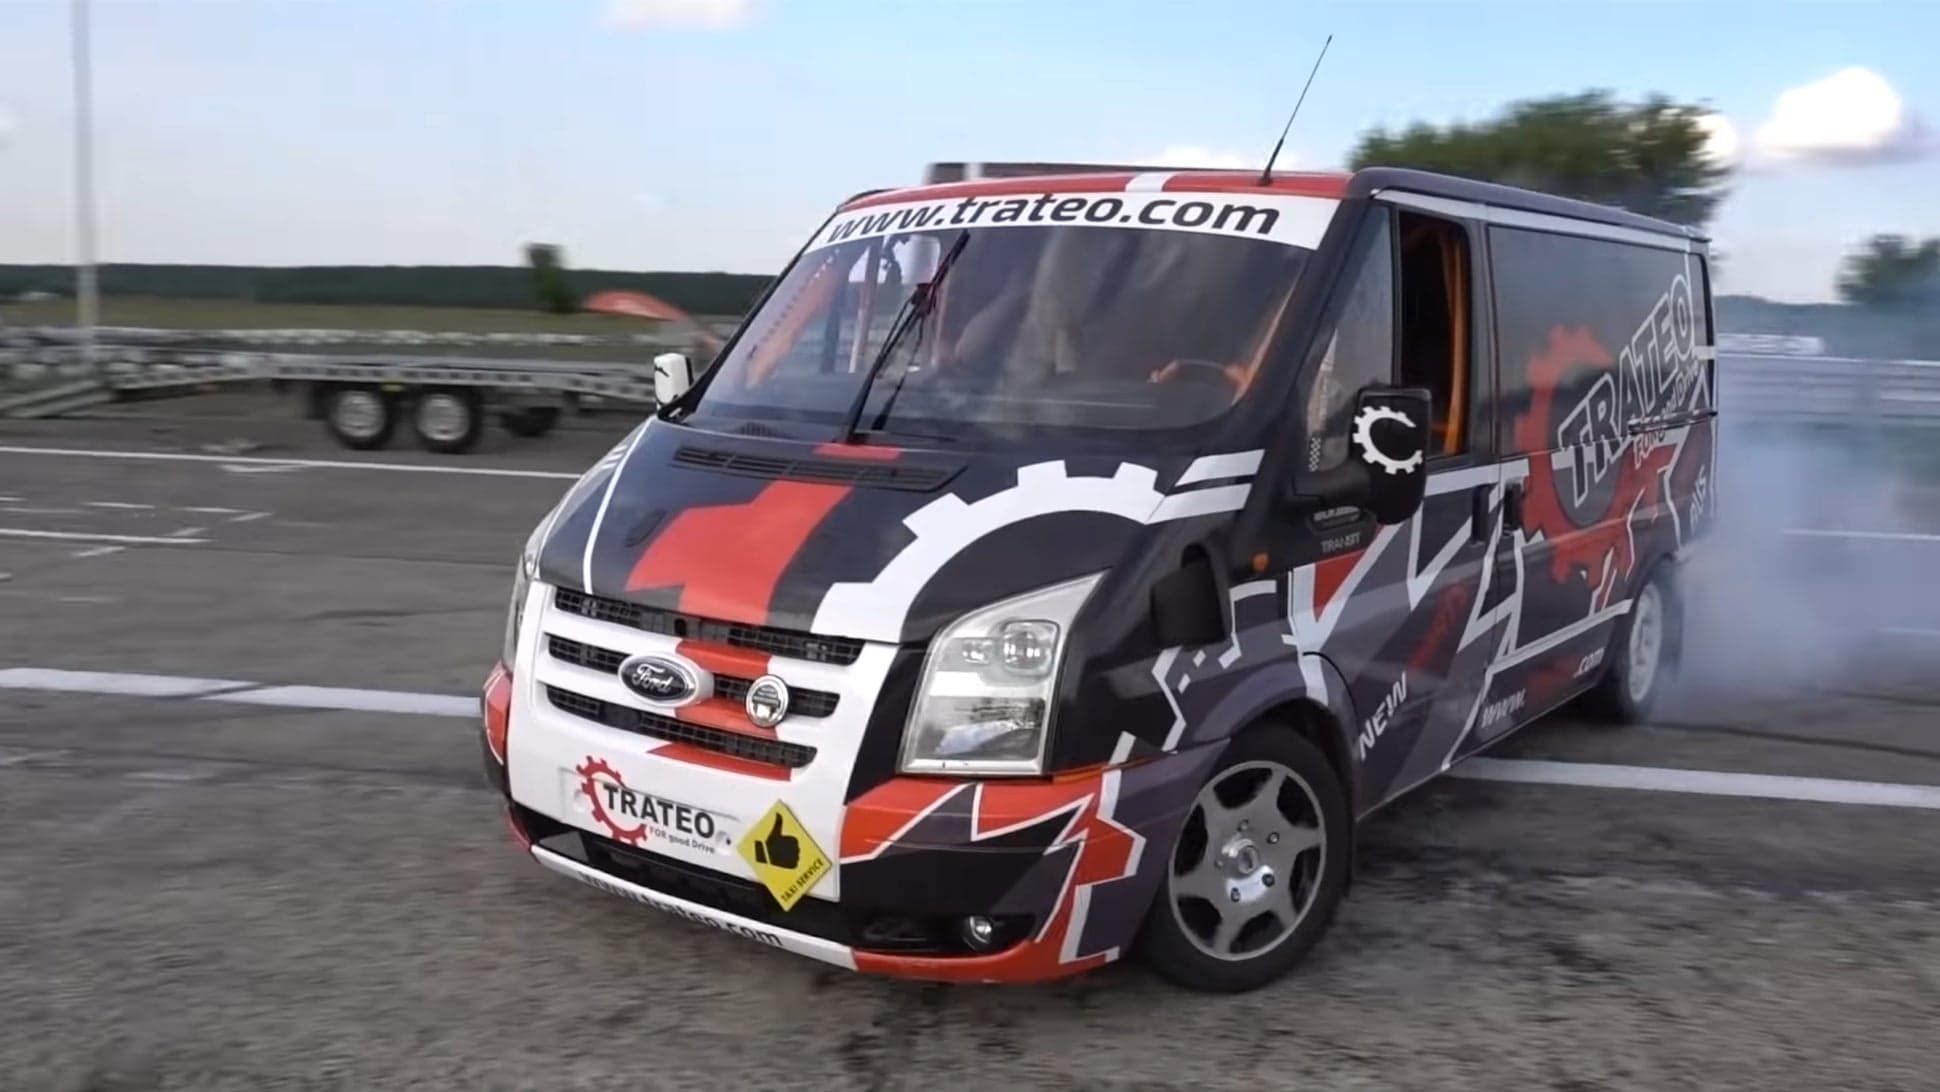 This BMW-Swapped Ford Transit Van Is a 440-Horsepower Monster Drift Machine